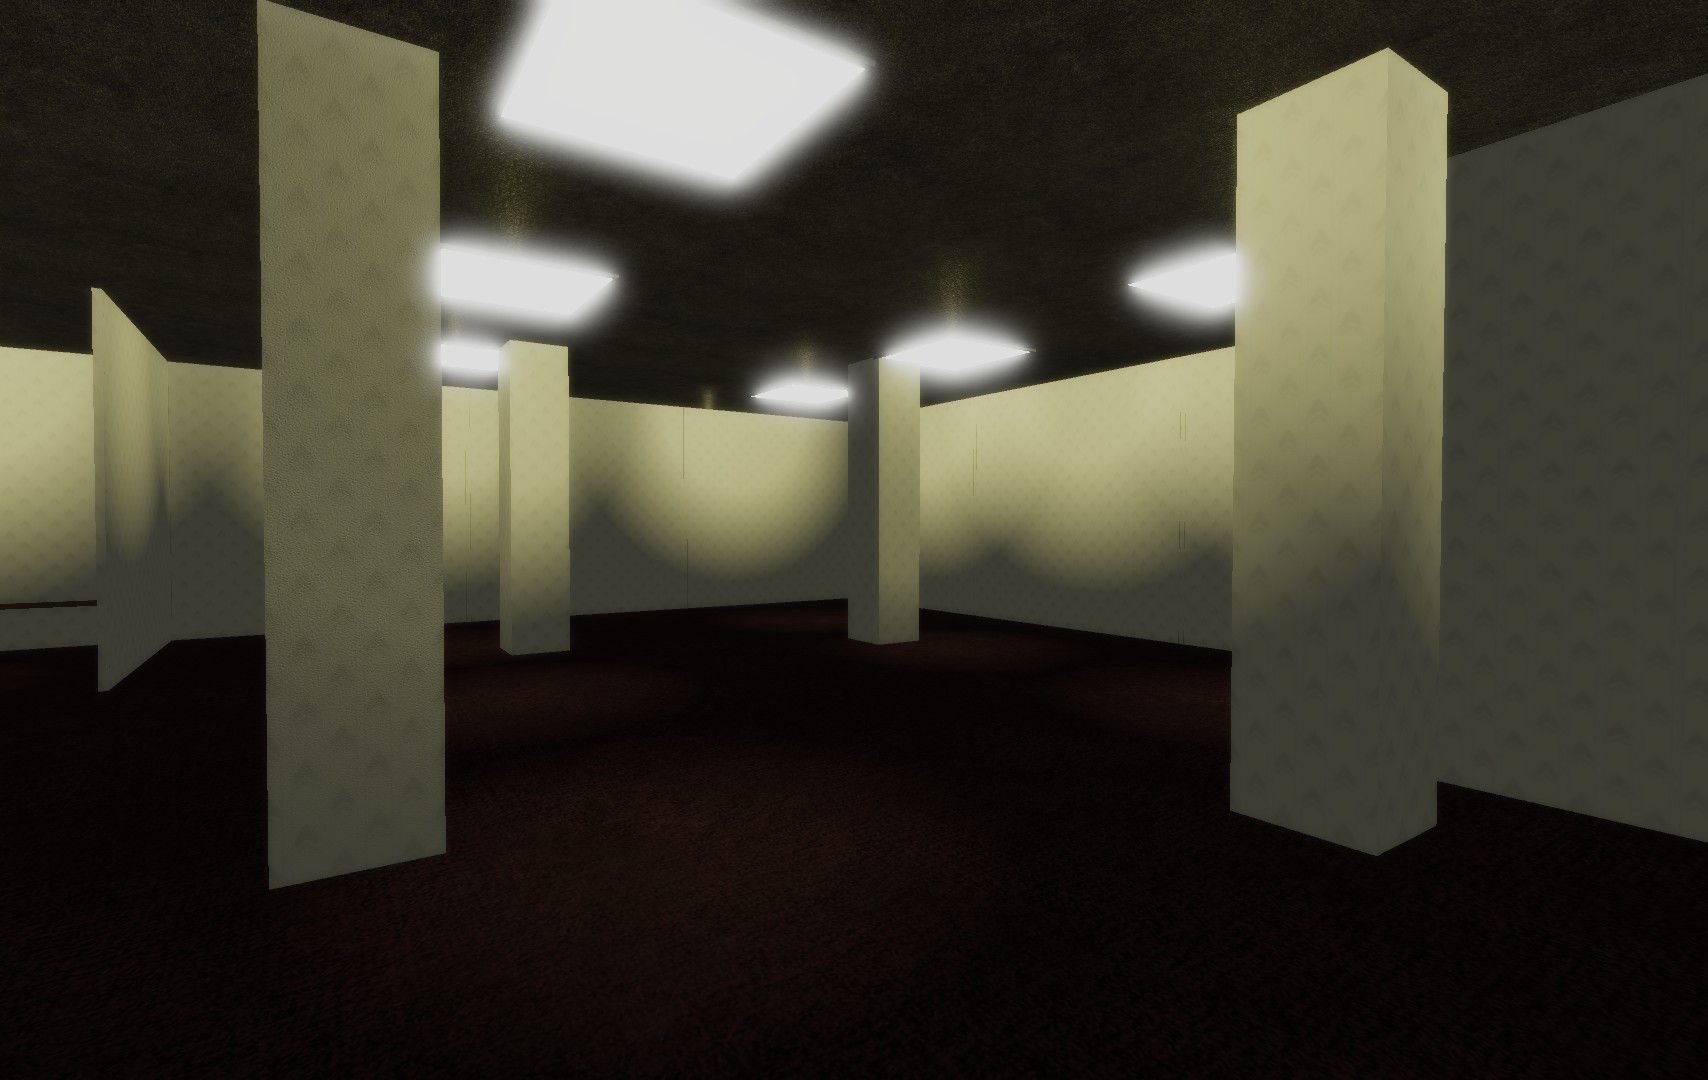 Project : Backrooms on X: -[THE BACKROOMS - VERSION 2.0 LEVEL 0 AND LEVEL  2 TEASER]- -[2.0 COMING SOON]- -[#Roblox #RobloxDev #Backrooms]-   / X